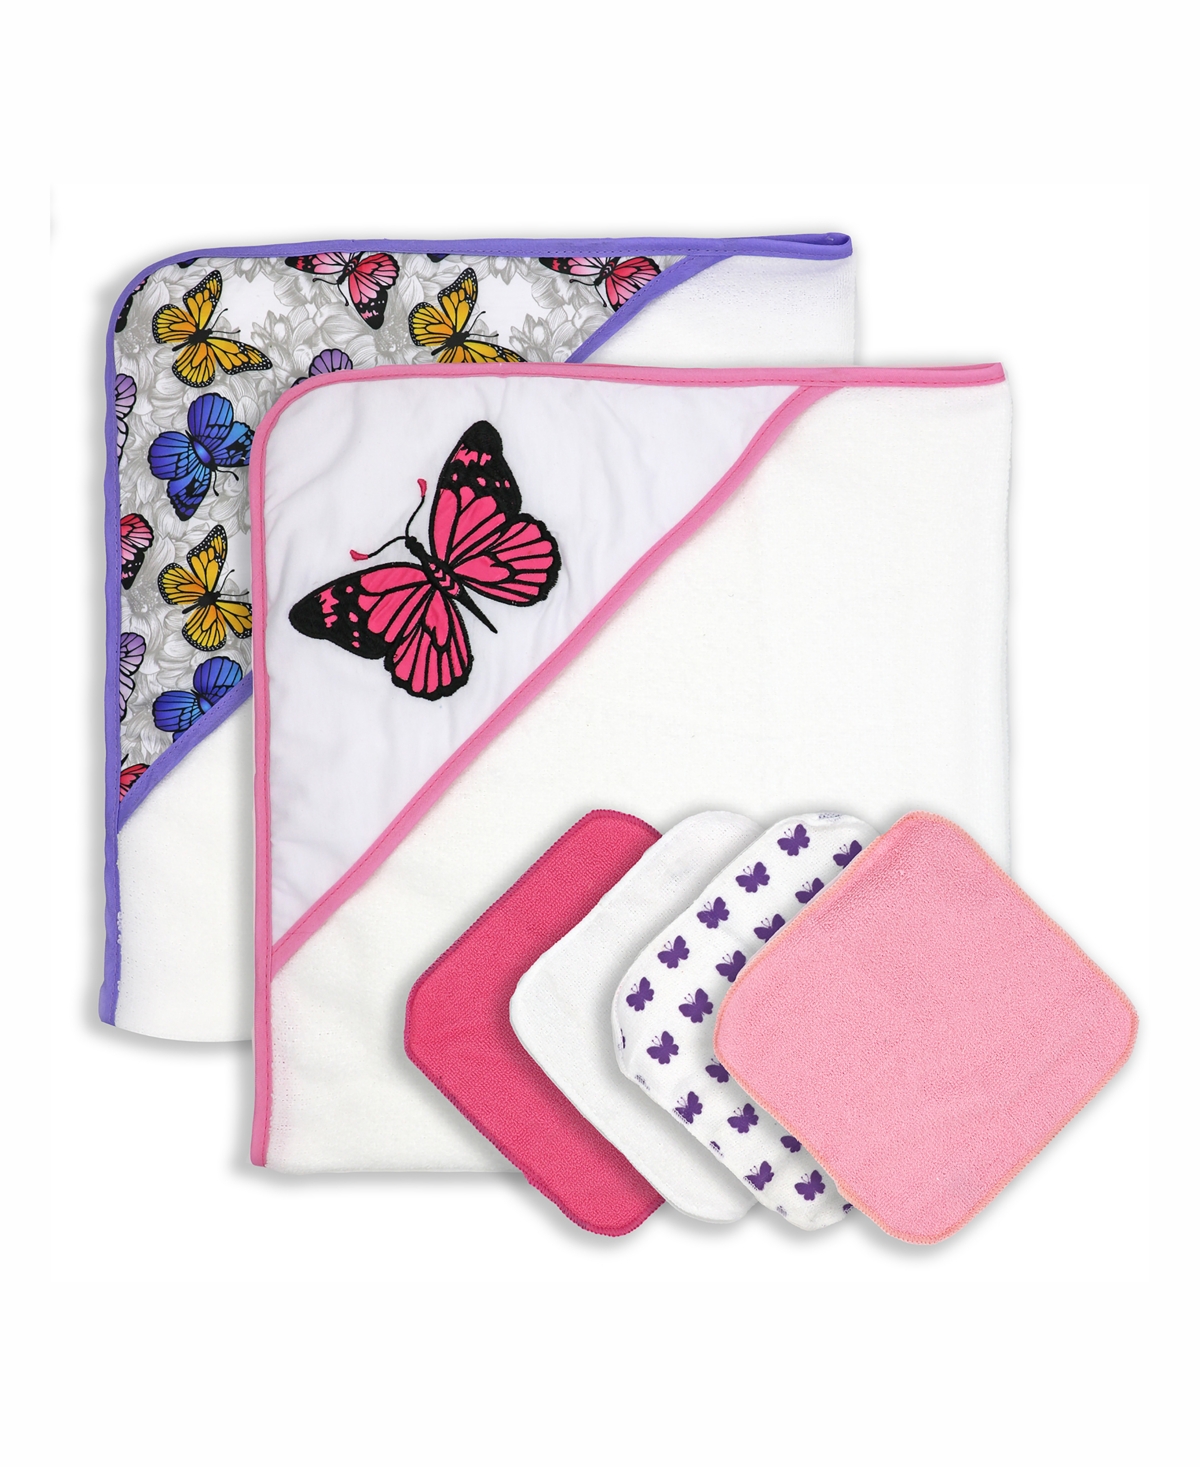 3 Stories Trading Baby Girls Hooded Towels And Washcloths, 6 Piece Set In Fuchsia And White